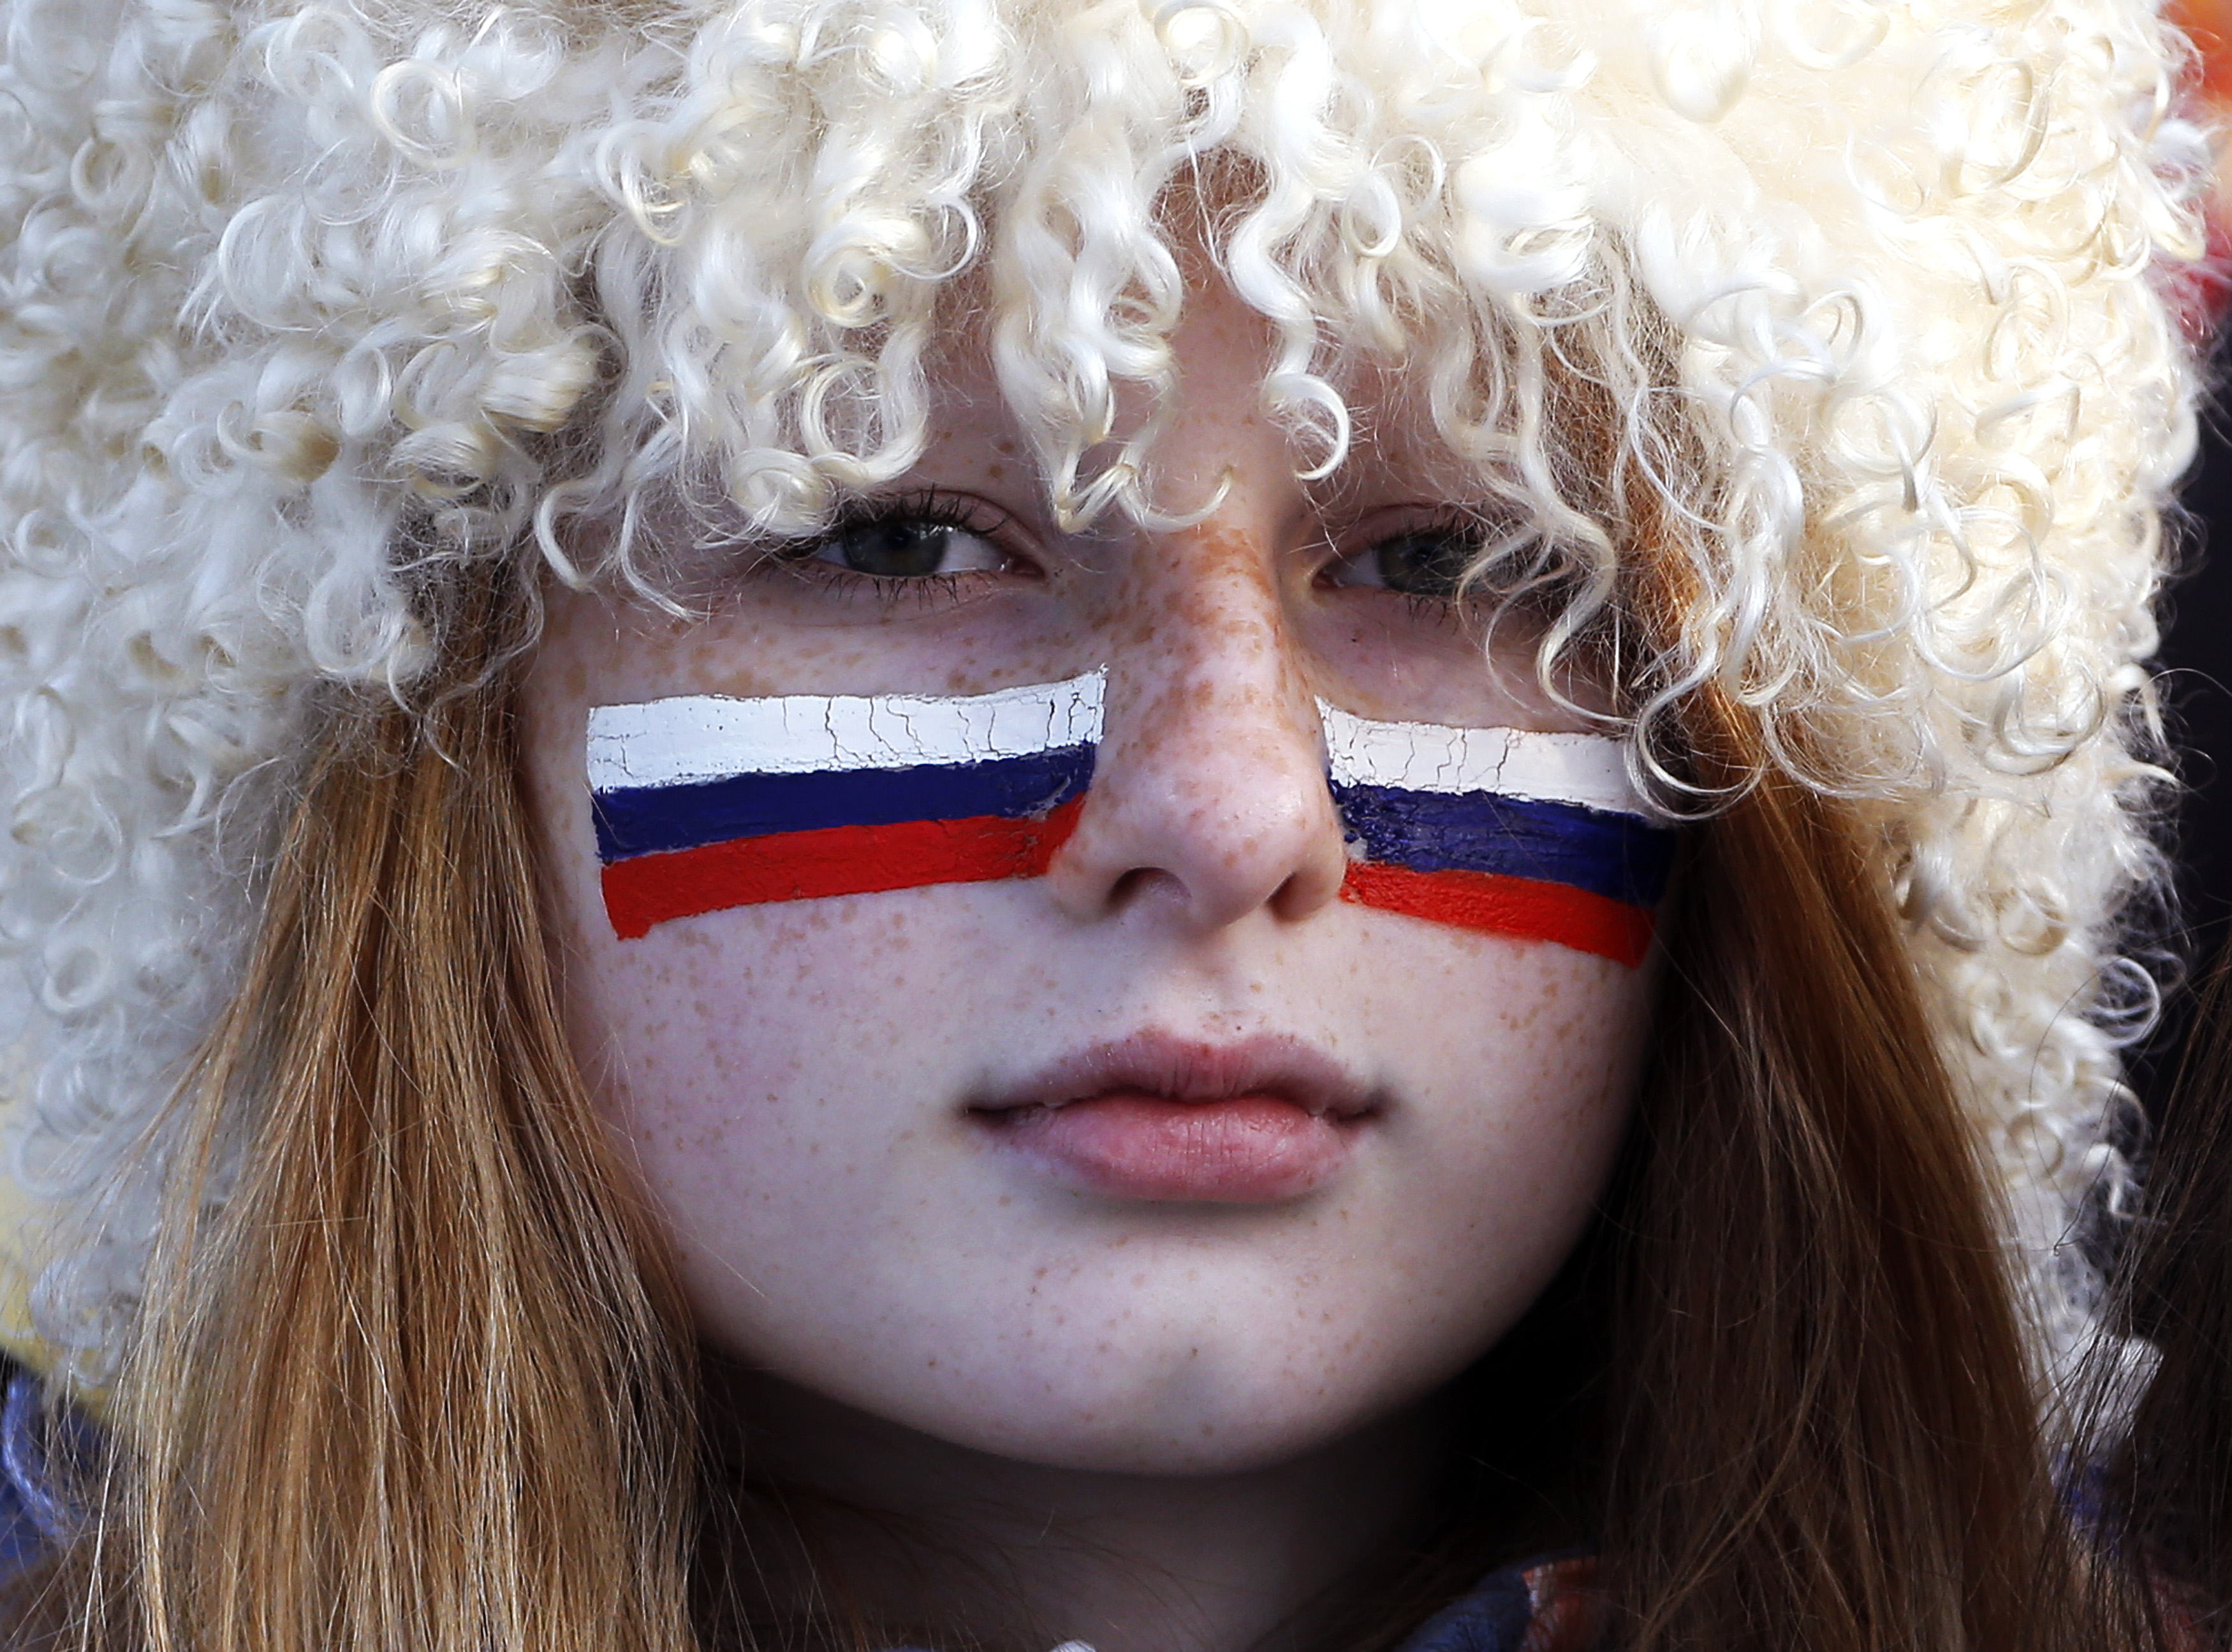 A Russian fan with her face painted with the Russian flag watches the men's quarter-finals ice hockey game between Russia and Finland. Russia was eliminated from the men's ice hockey competition at the Sochi Games on Wednesday following a 3-1 quarter-final loss to Finland. (Eric Gaillard&mdash;Reuters)